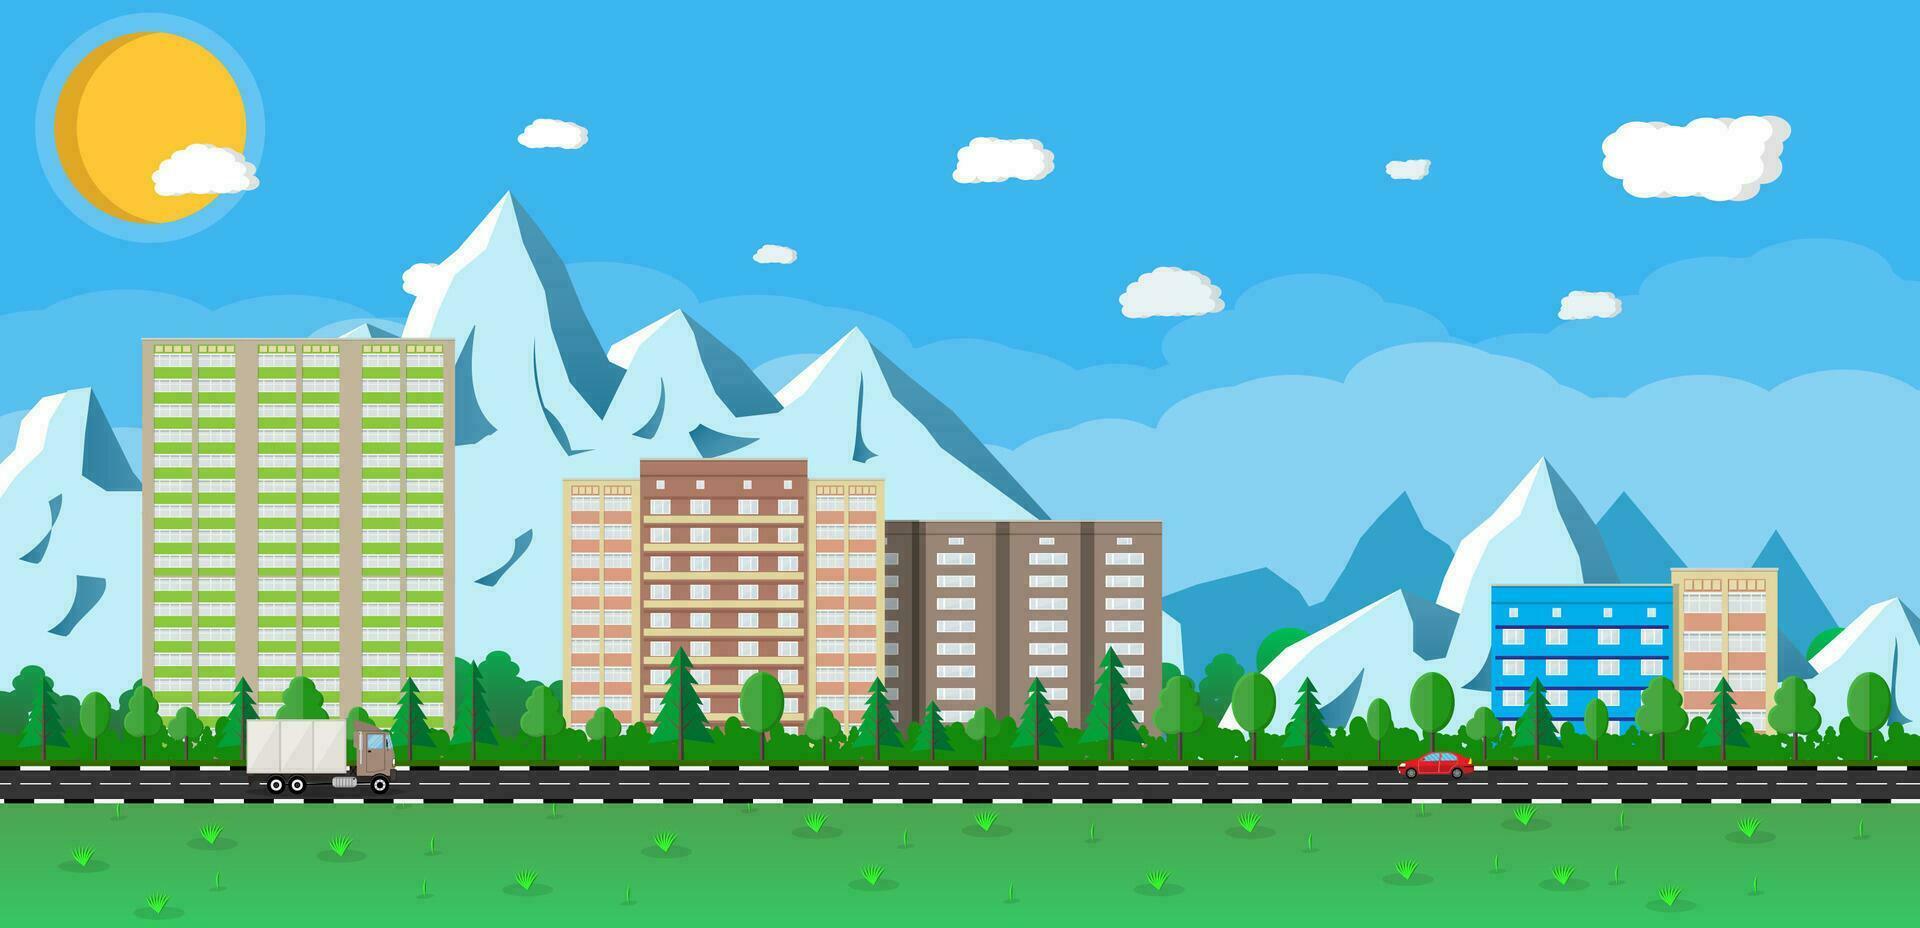 Small city landscape. Houses in the mountains among the trees. road with cars. blue sky with sun and clouds. vector illustration in flat tyle